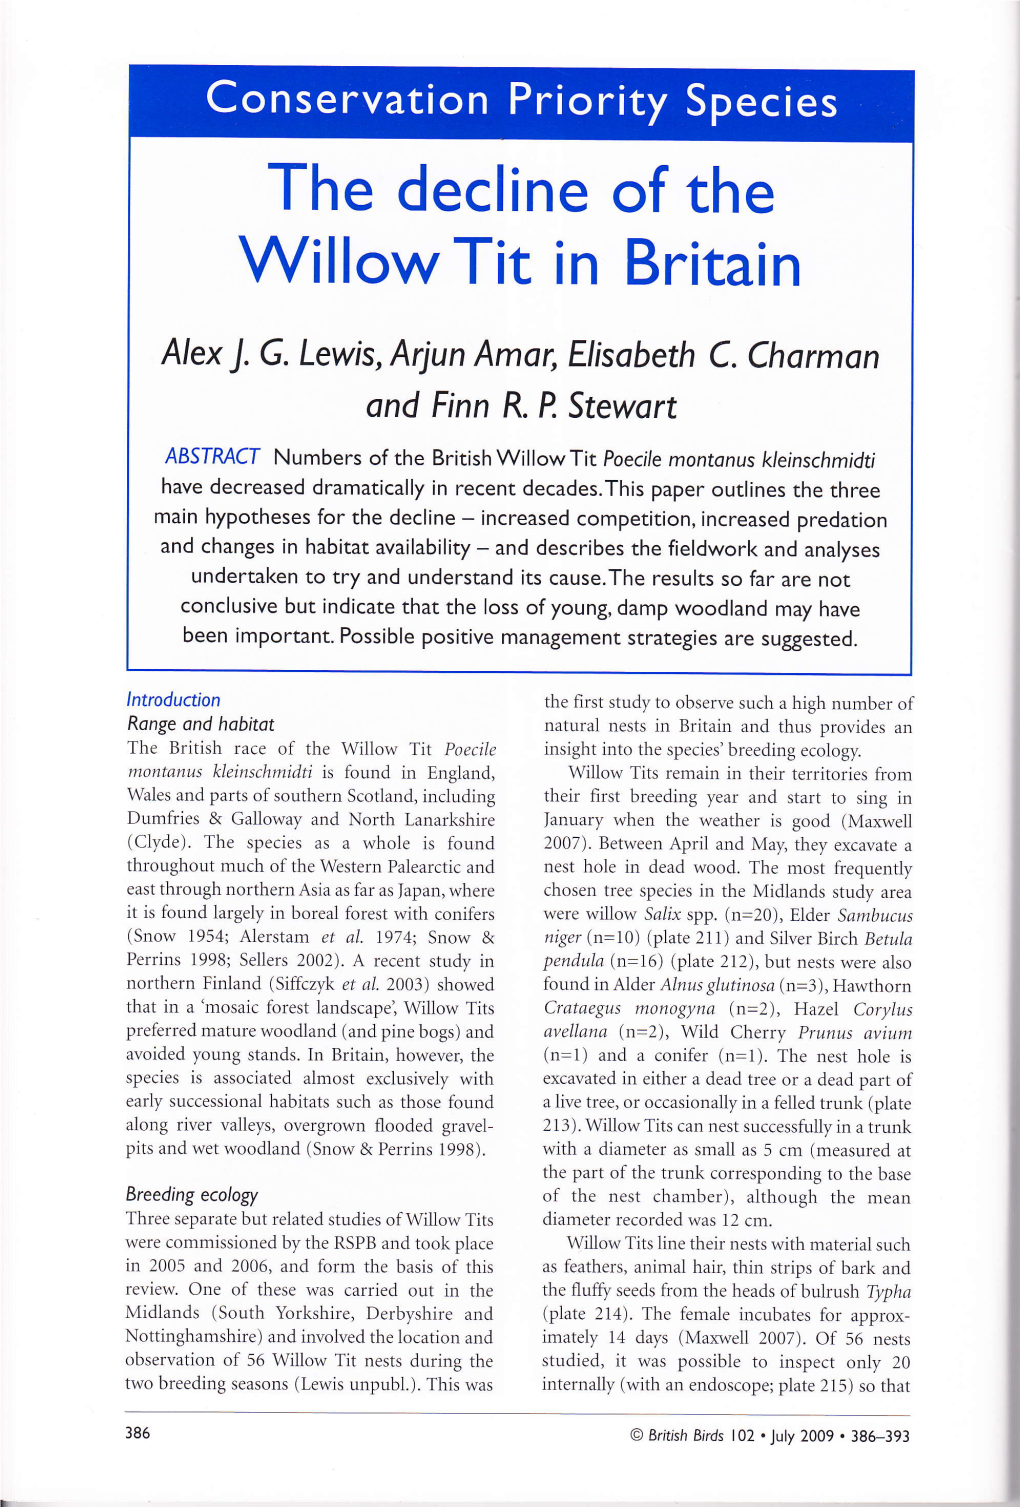 The Decline of the Willow Tit in Britain